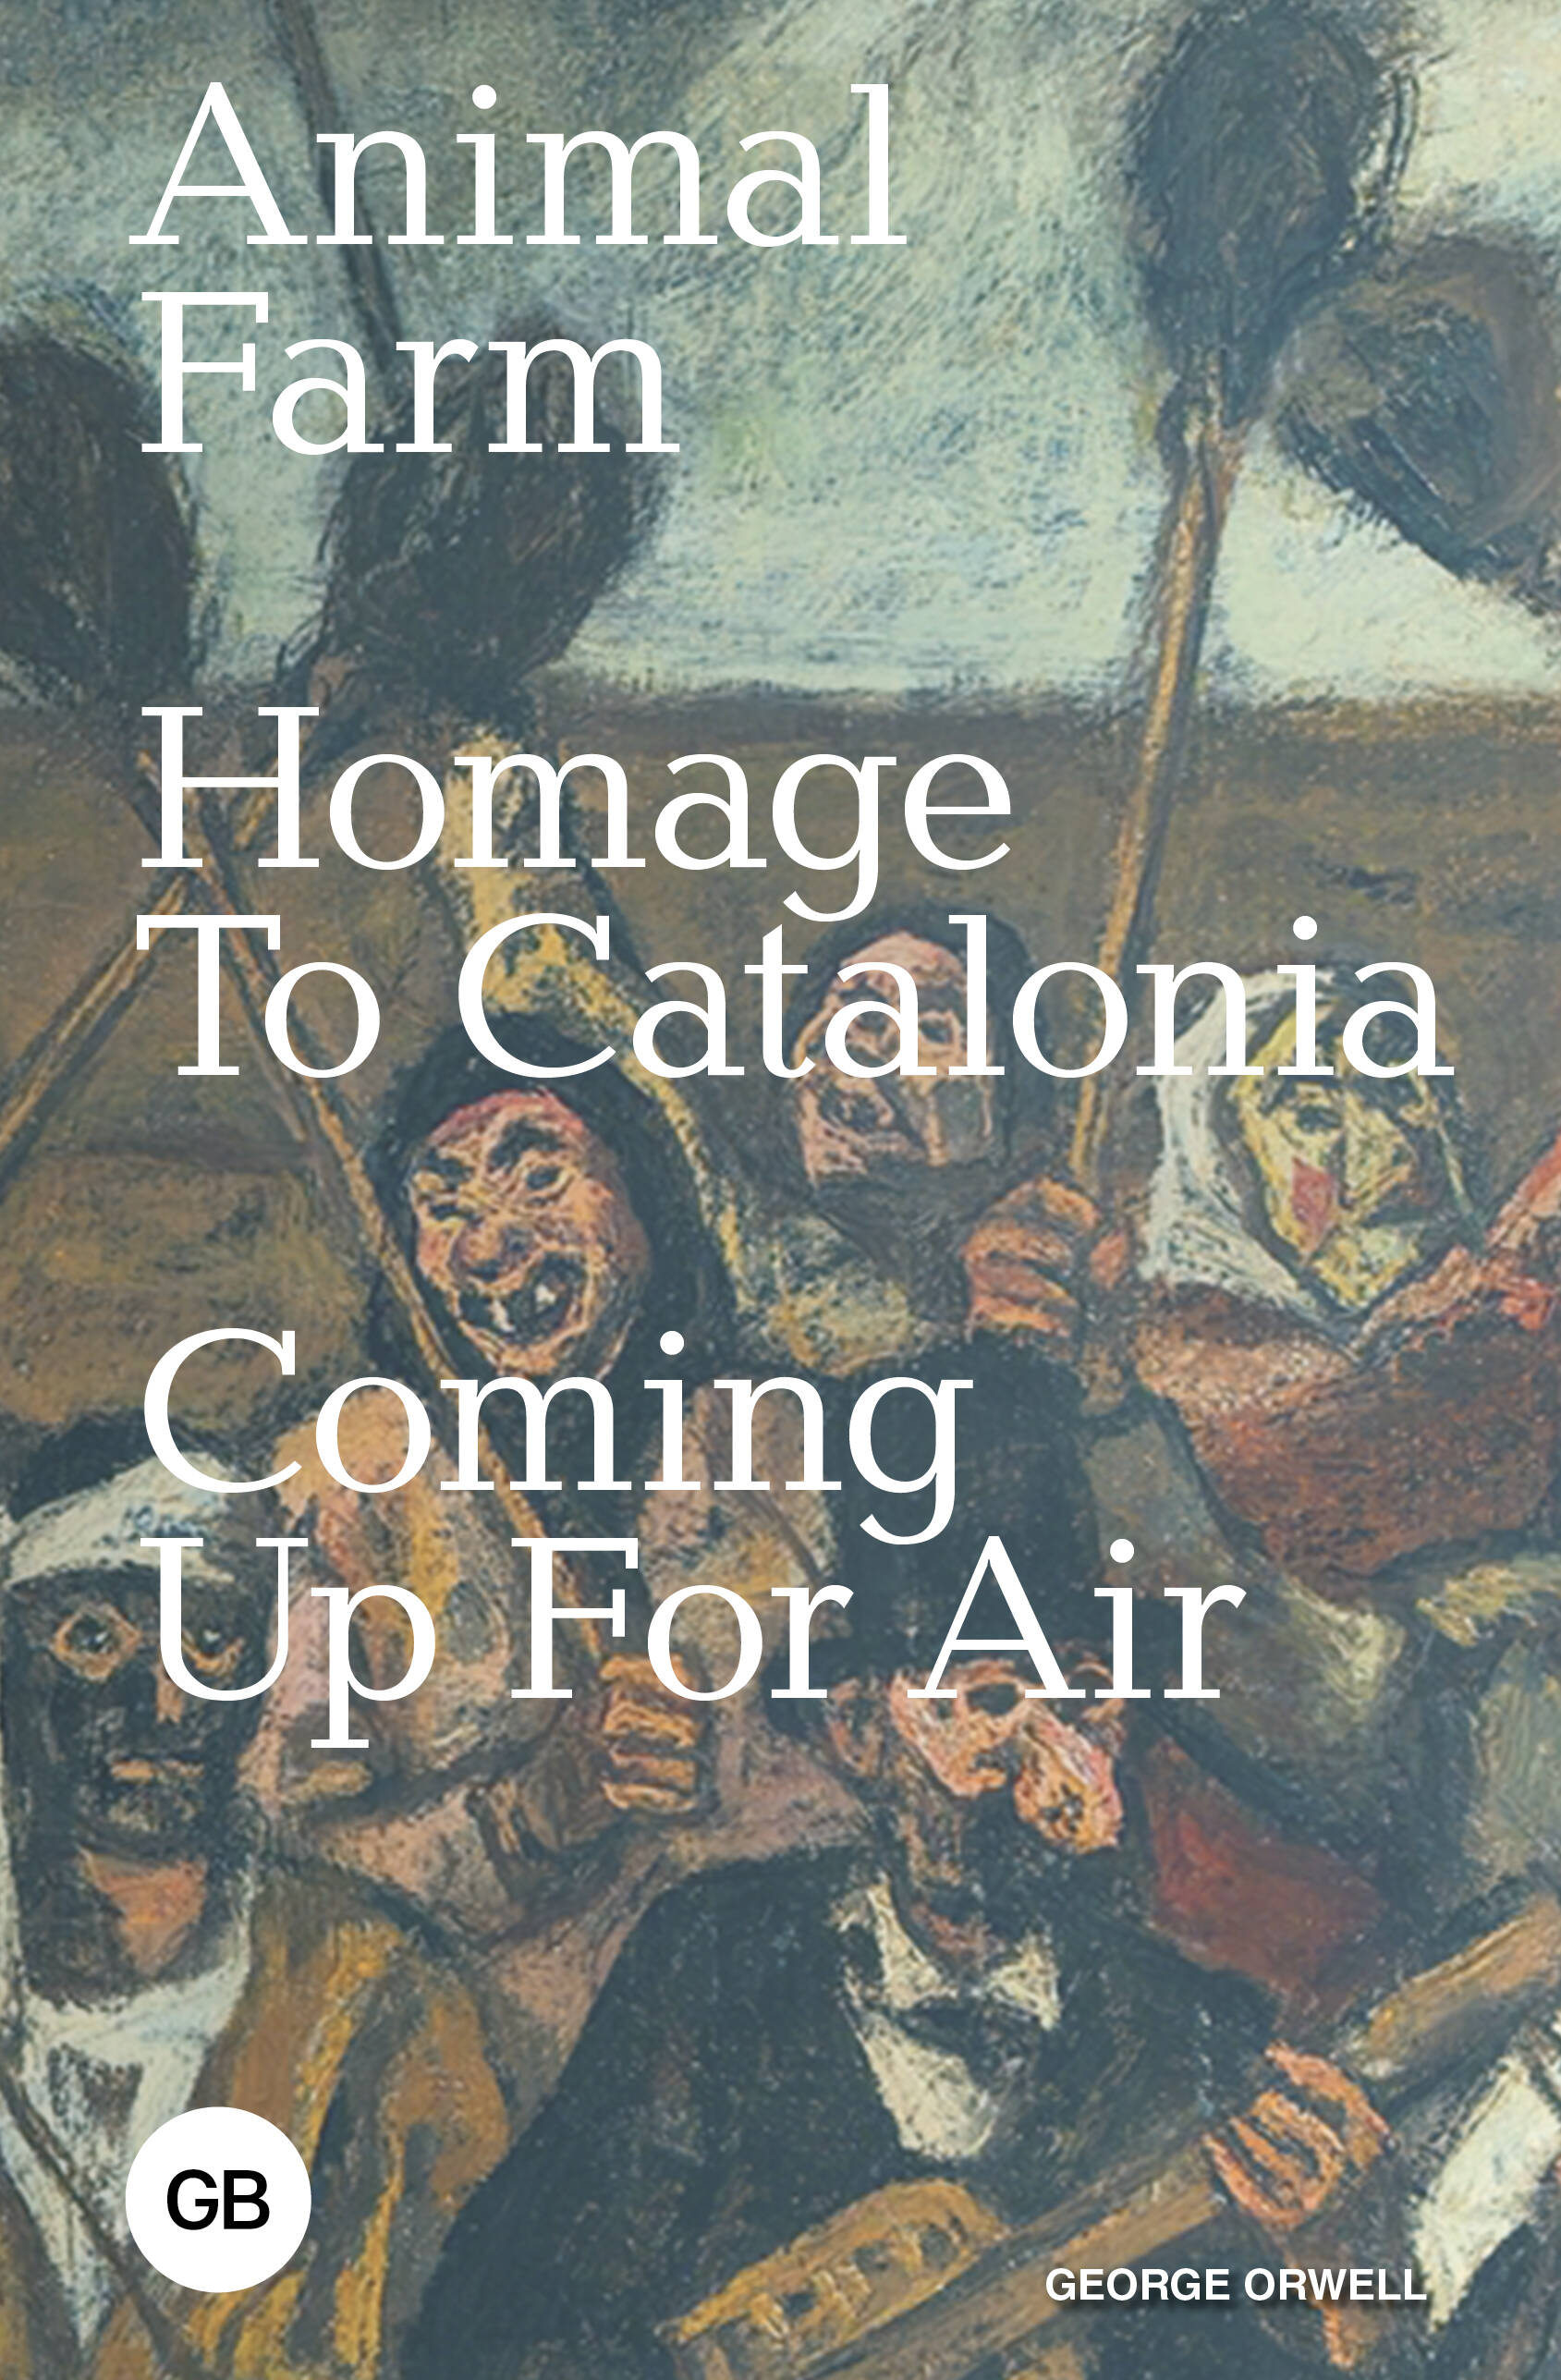 orwell george animal farm homage to catalonia coming up for air Оруэлл Джордж Animal Farm, Homage to Catalonia, Coming Up for Air